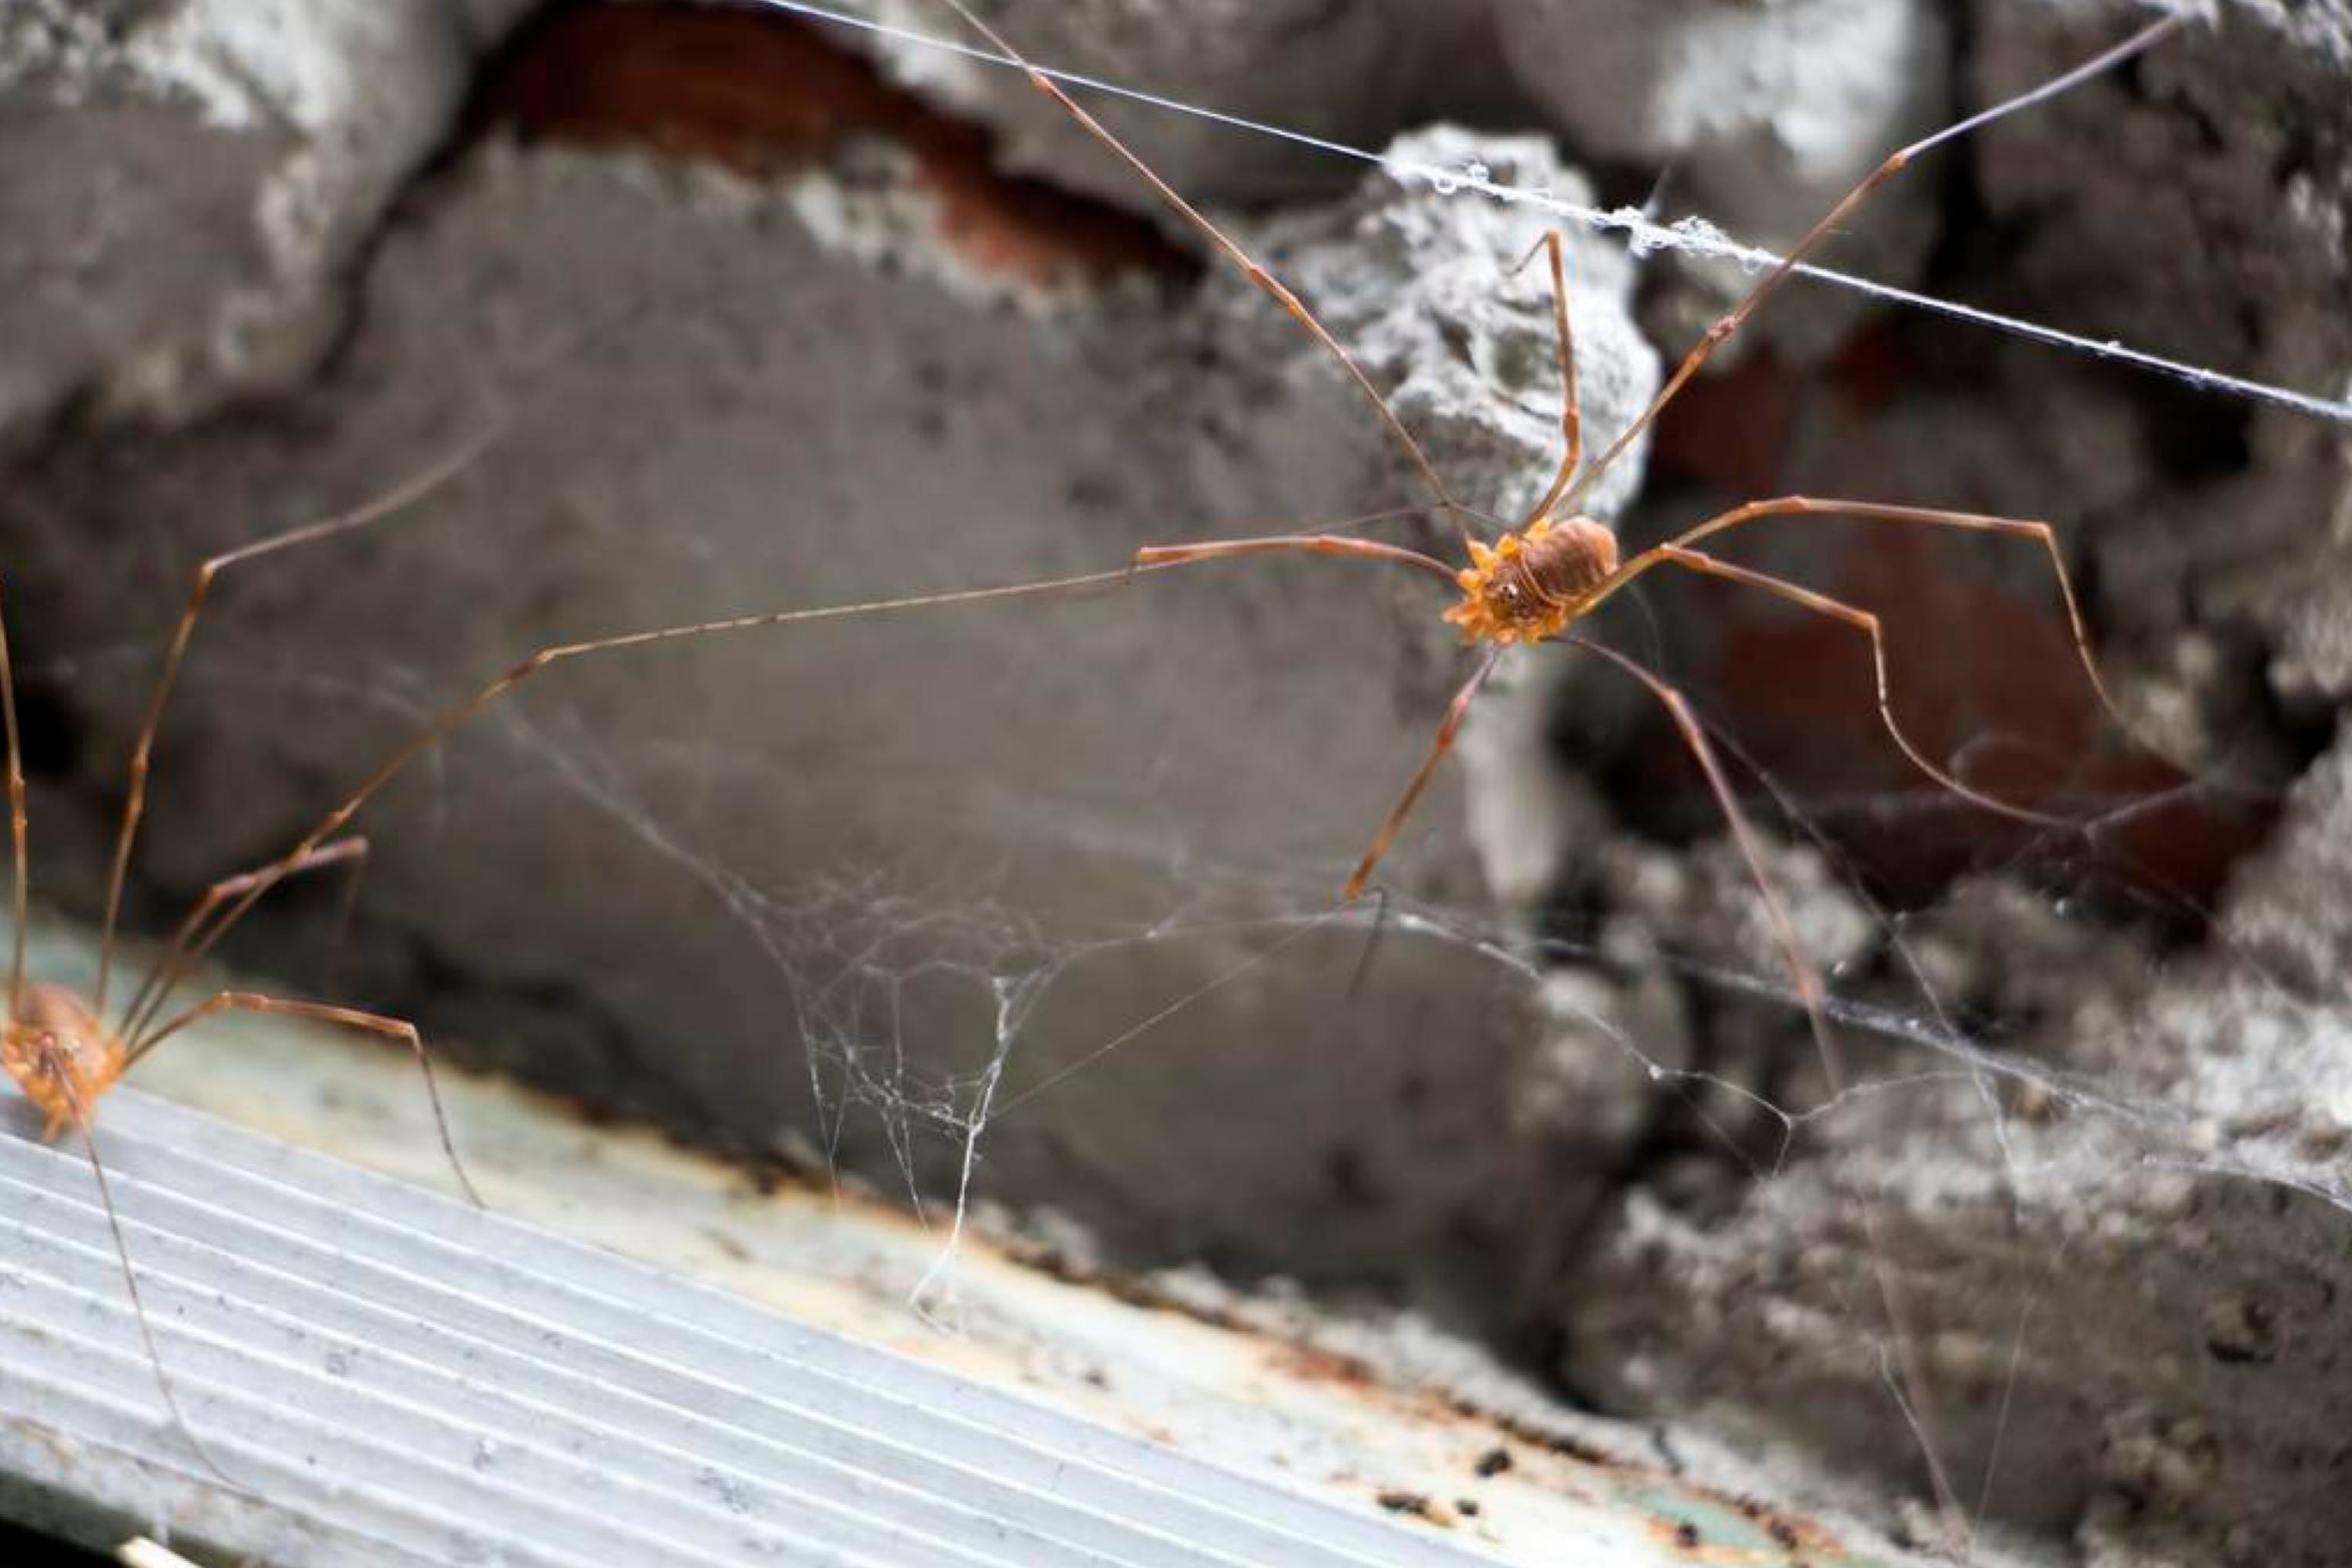 How to Prevent Spiders On Porch